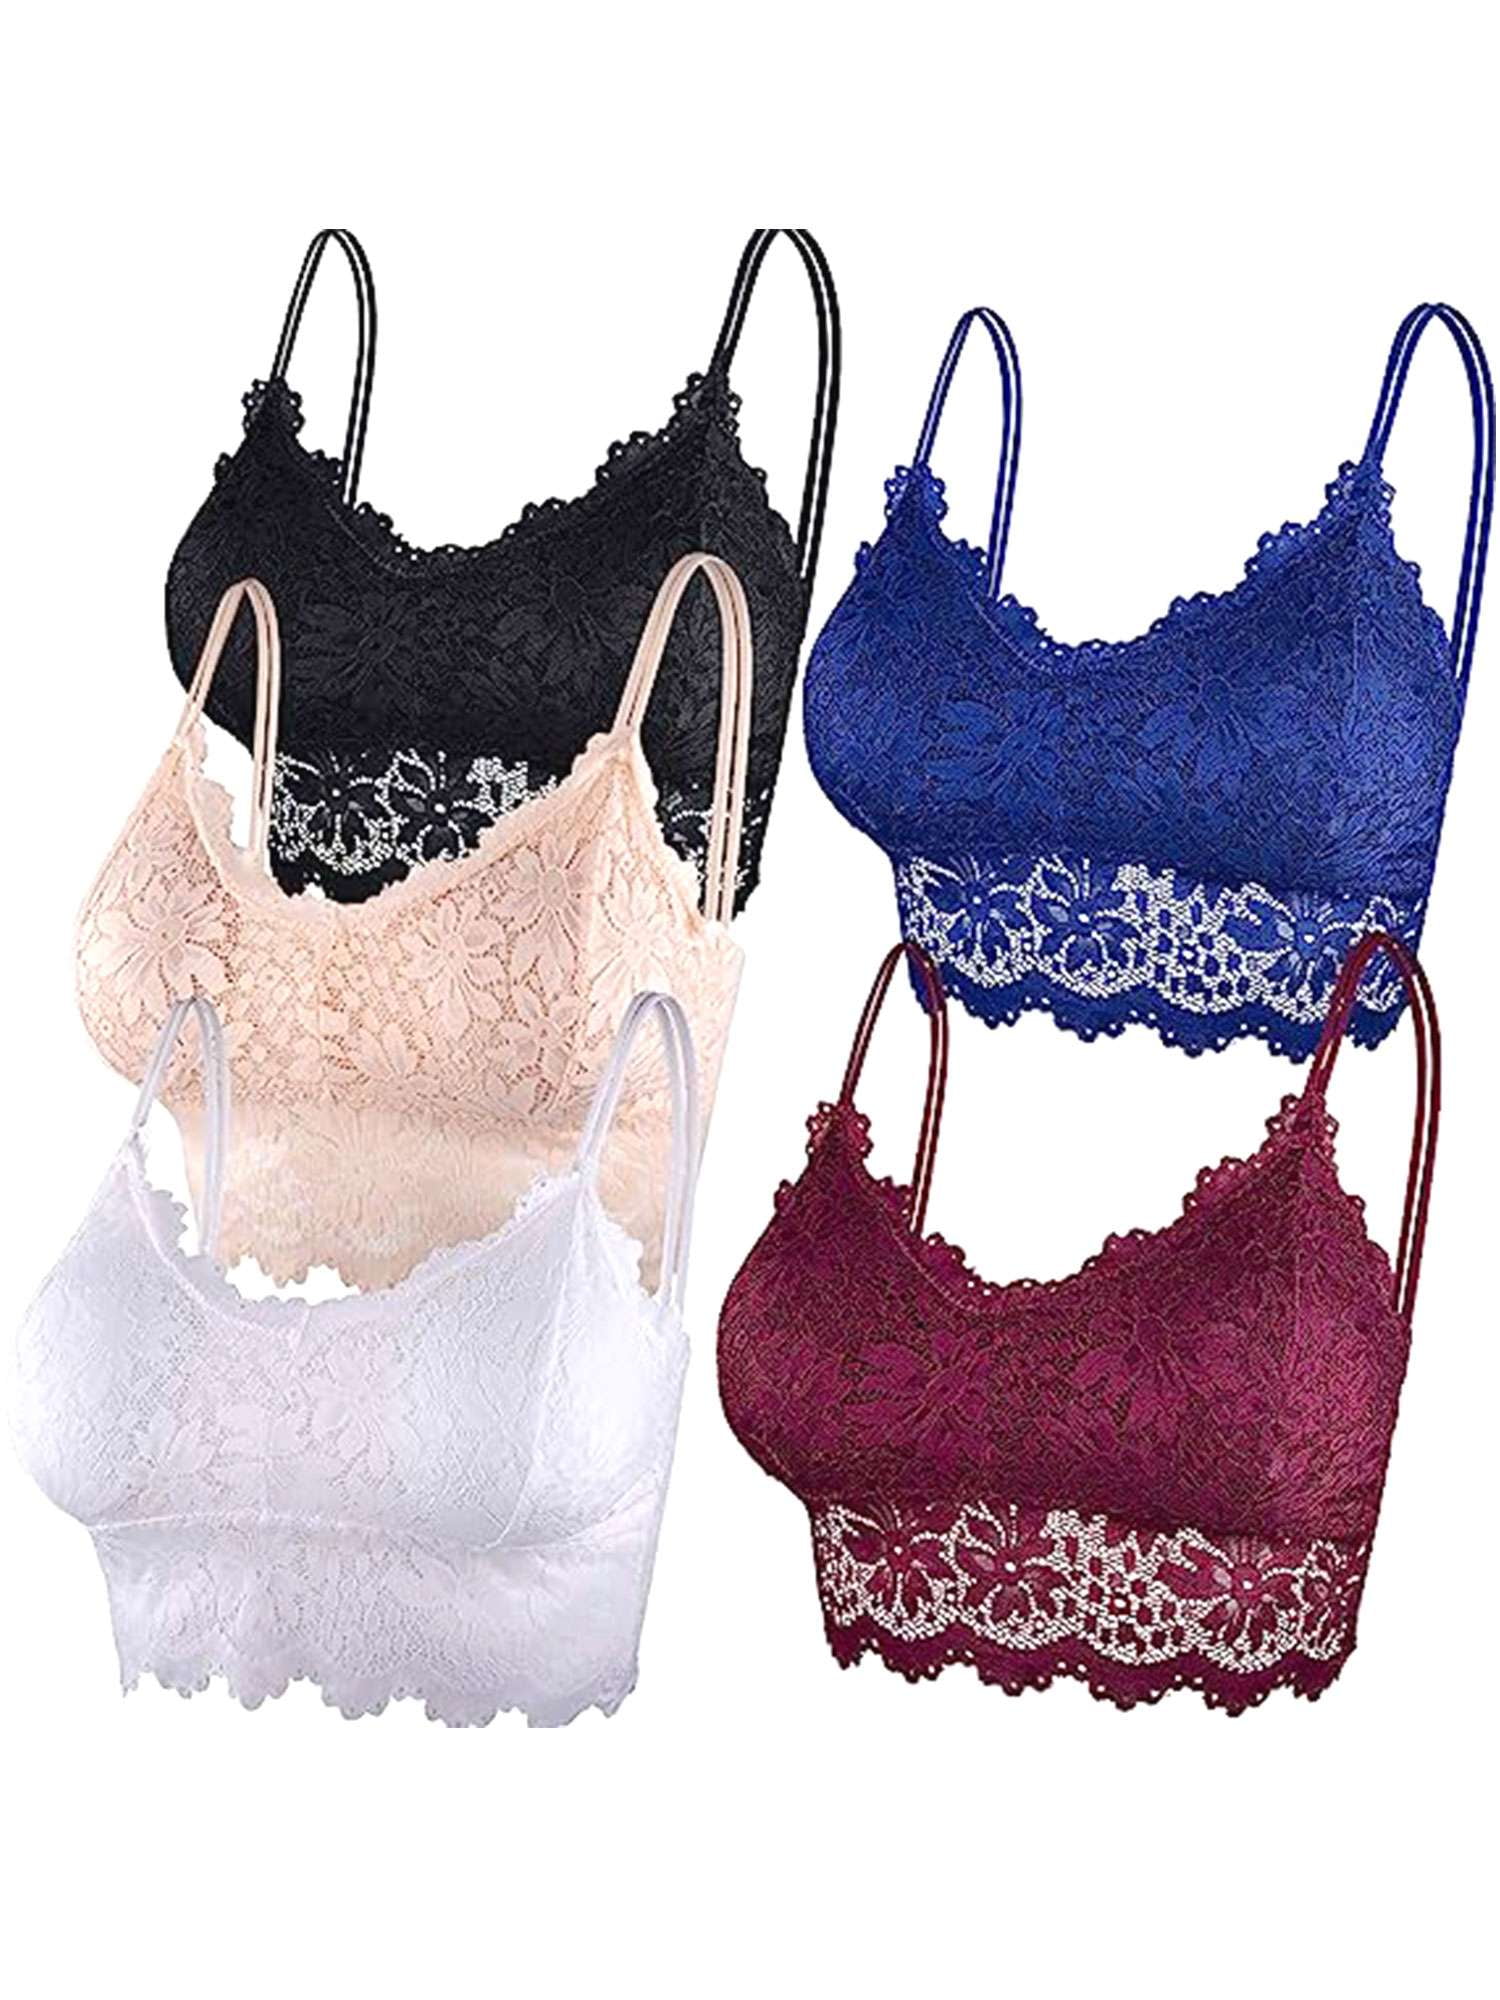 BadPiggies 5-Pack Lace Bralettes for Women Bralette Padded Lace Bandeau ...